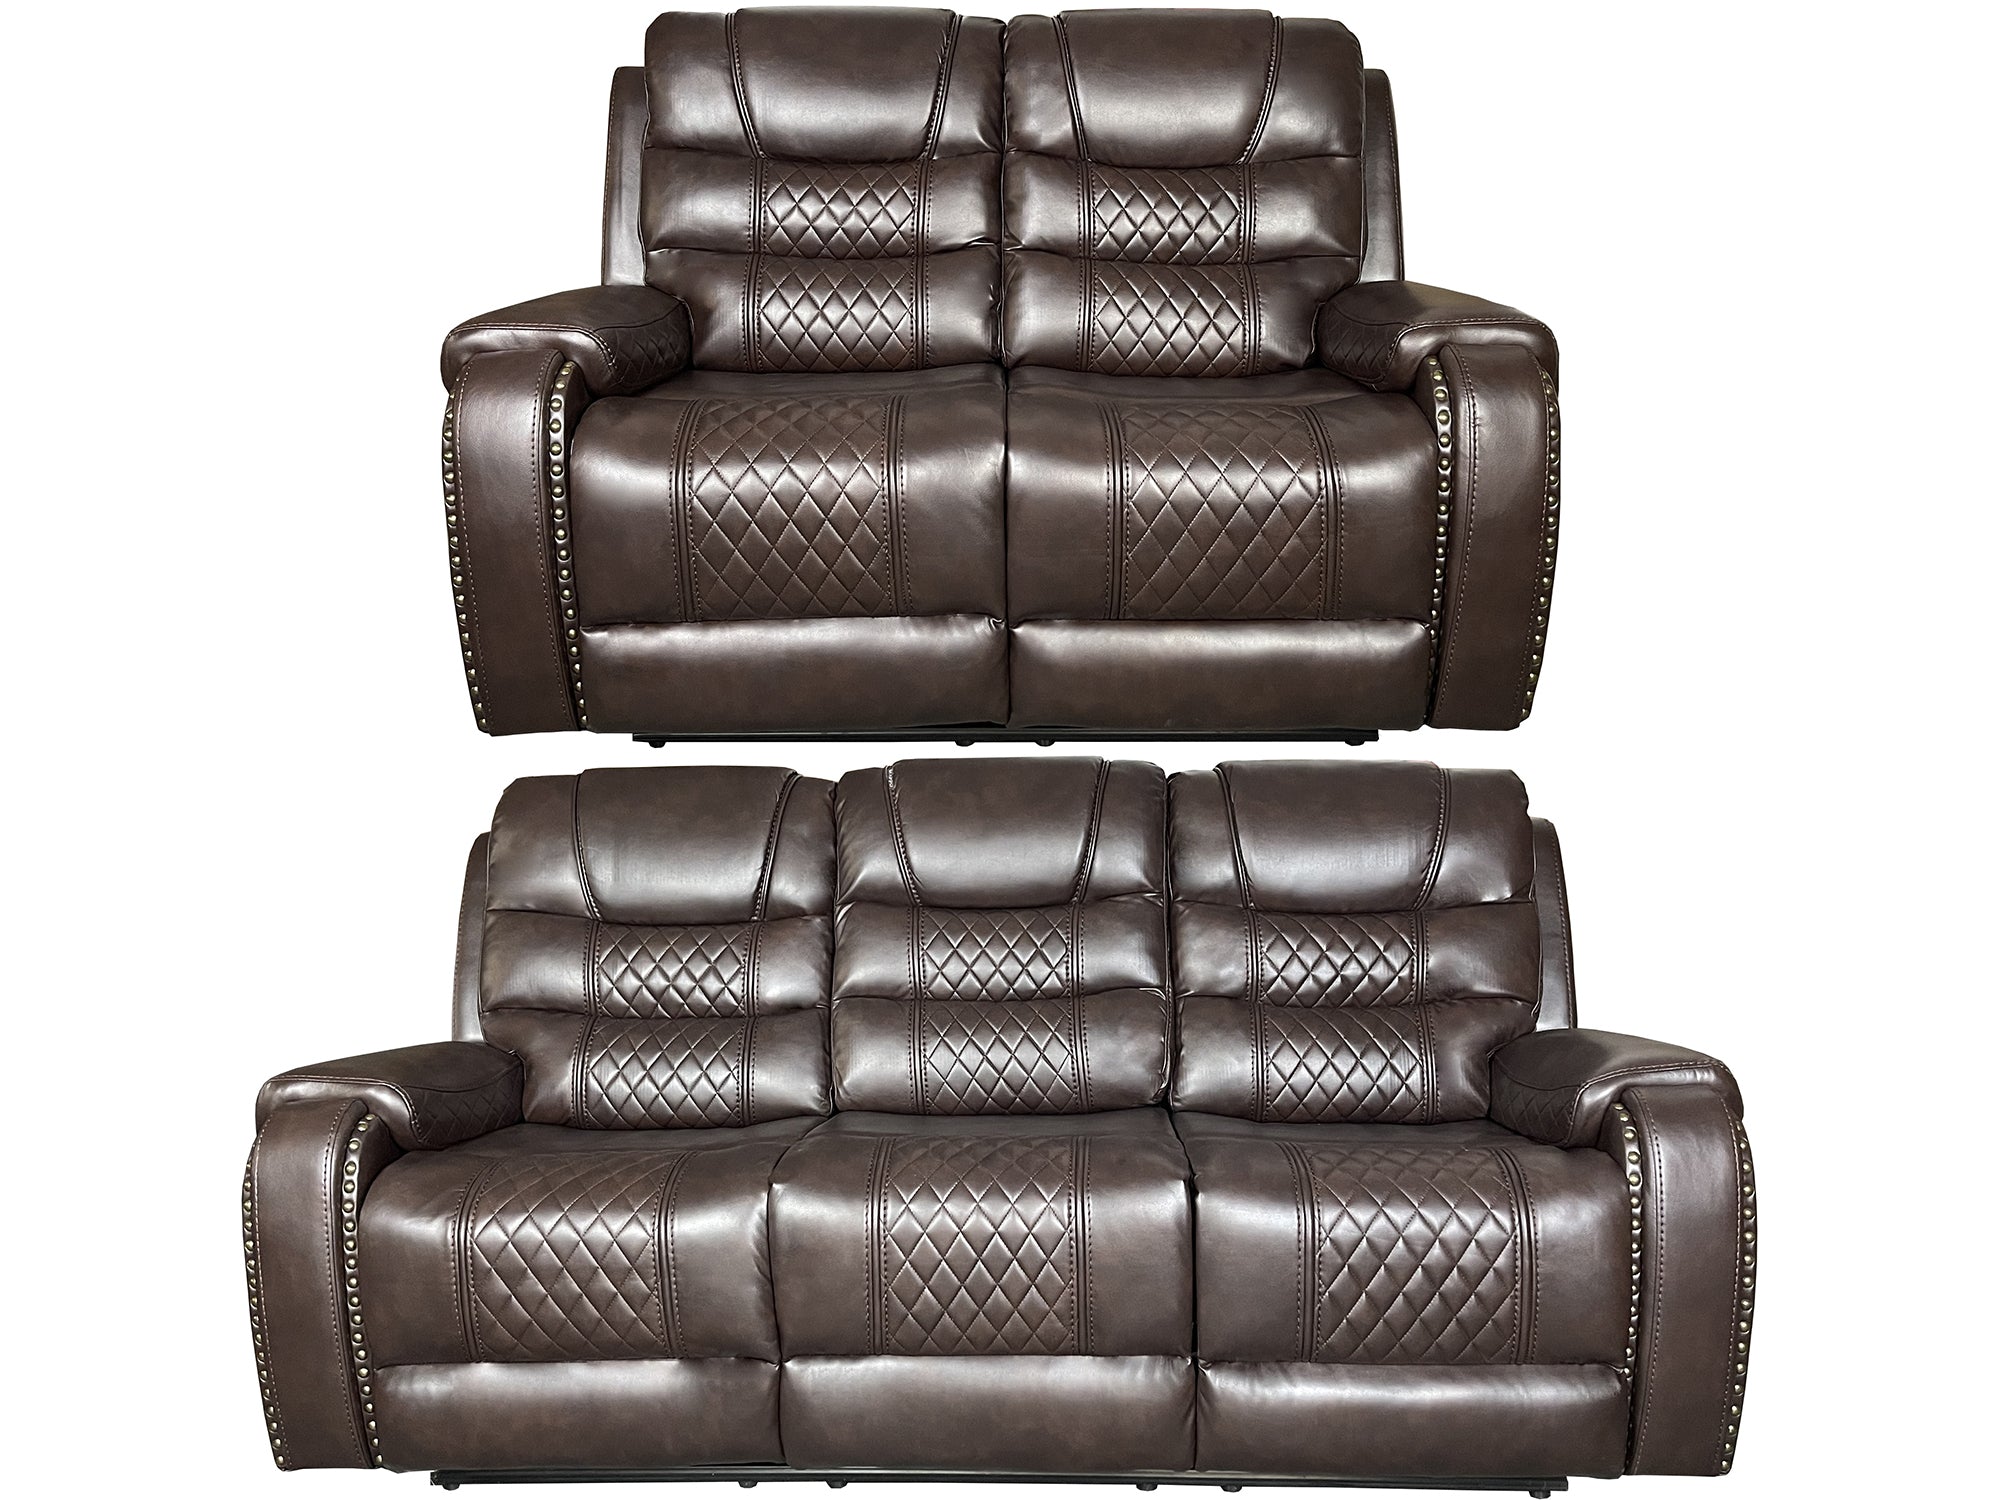 ALASKA 3+2 RECLINER LEATHER AIRE SOFA - BROWN